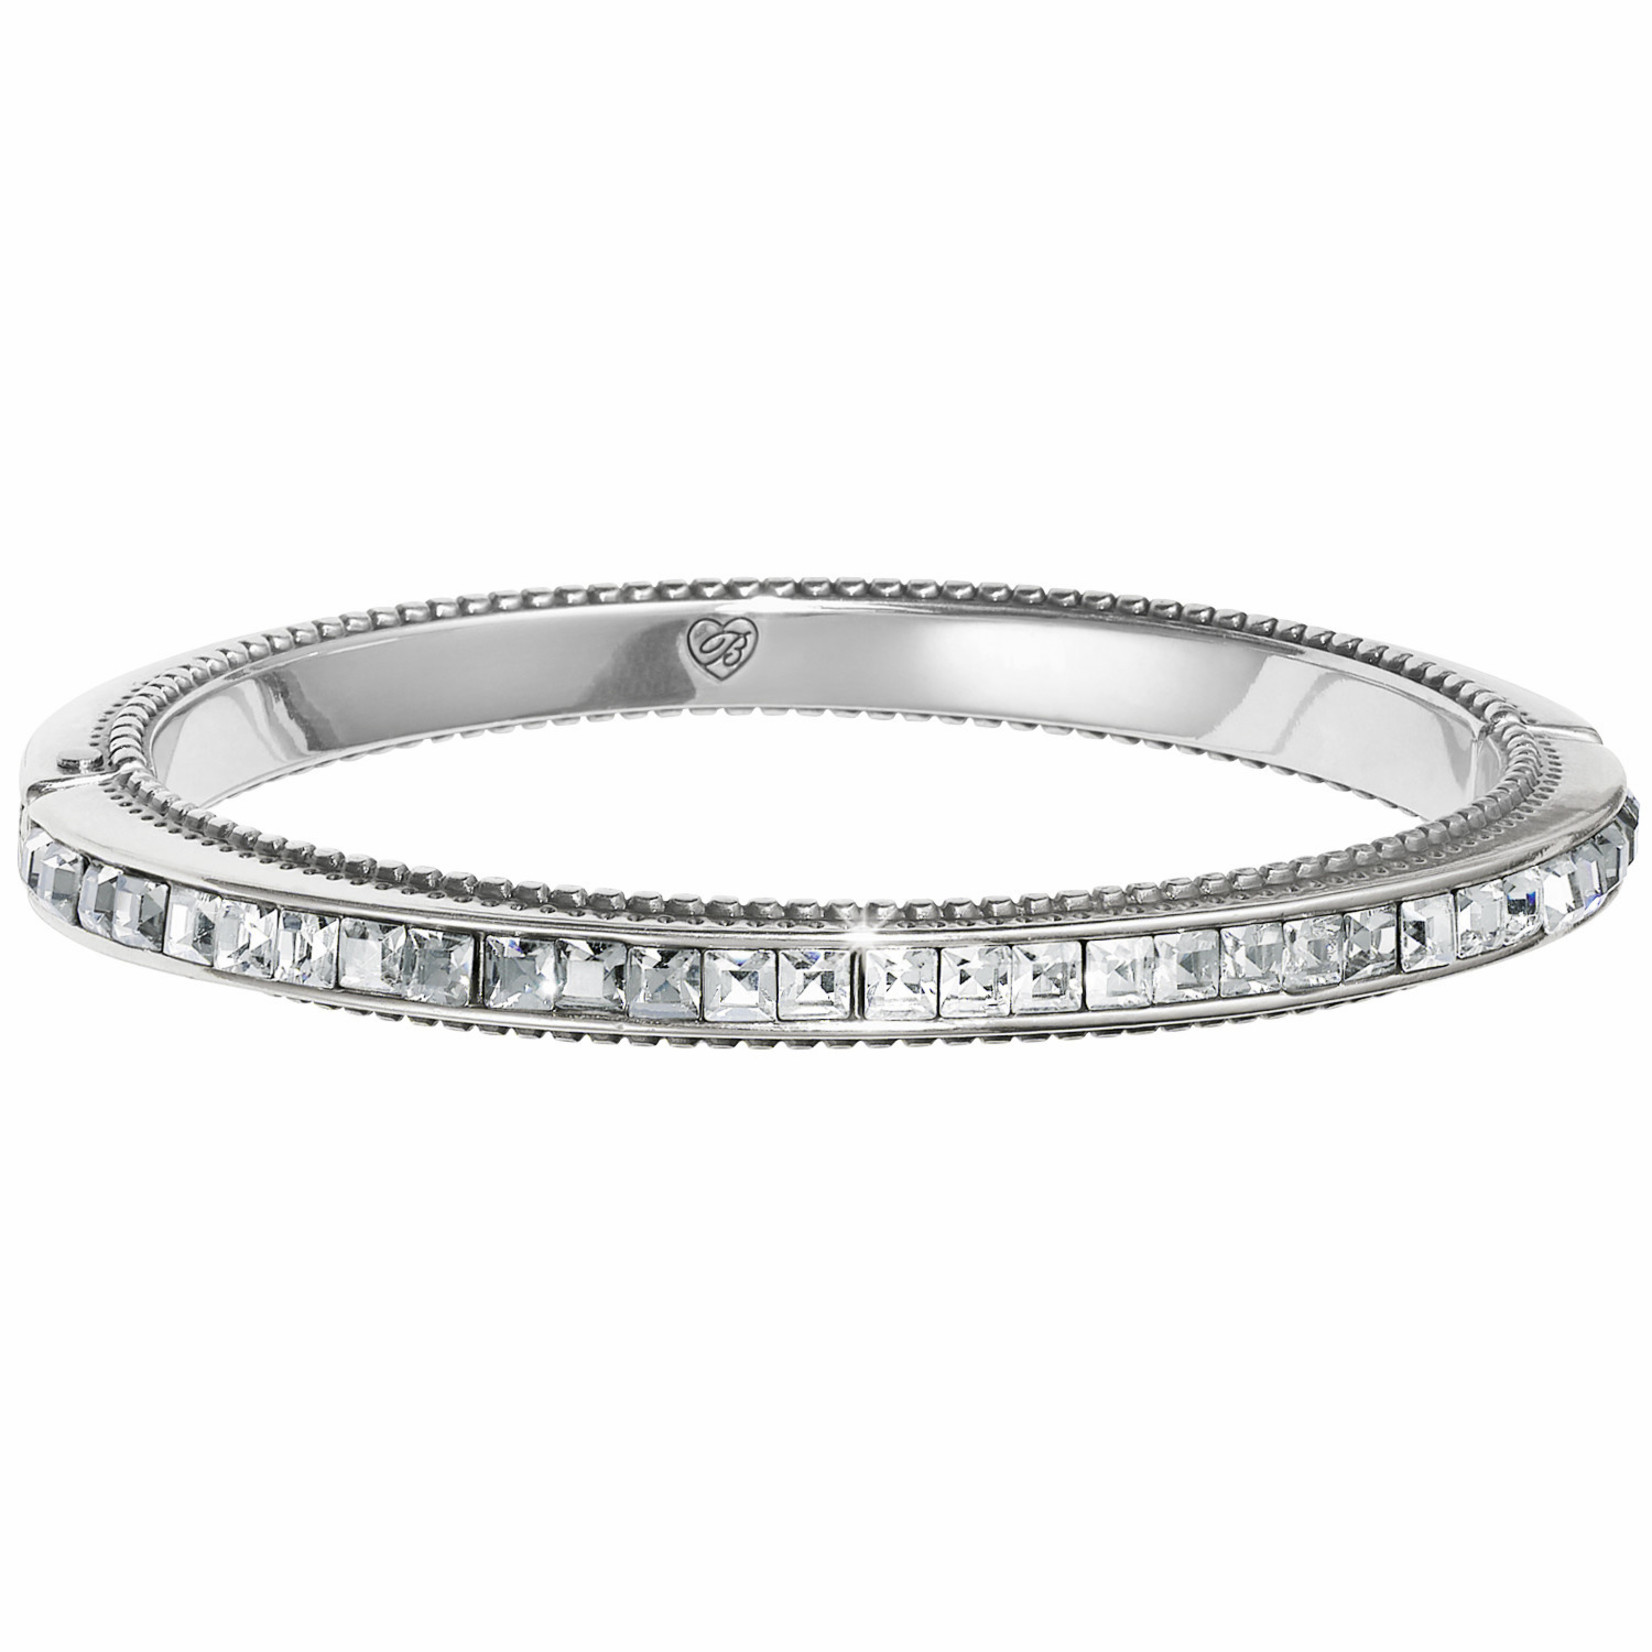 Spectrum Hinged Bangle - Molly's Meanderings